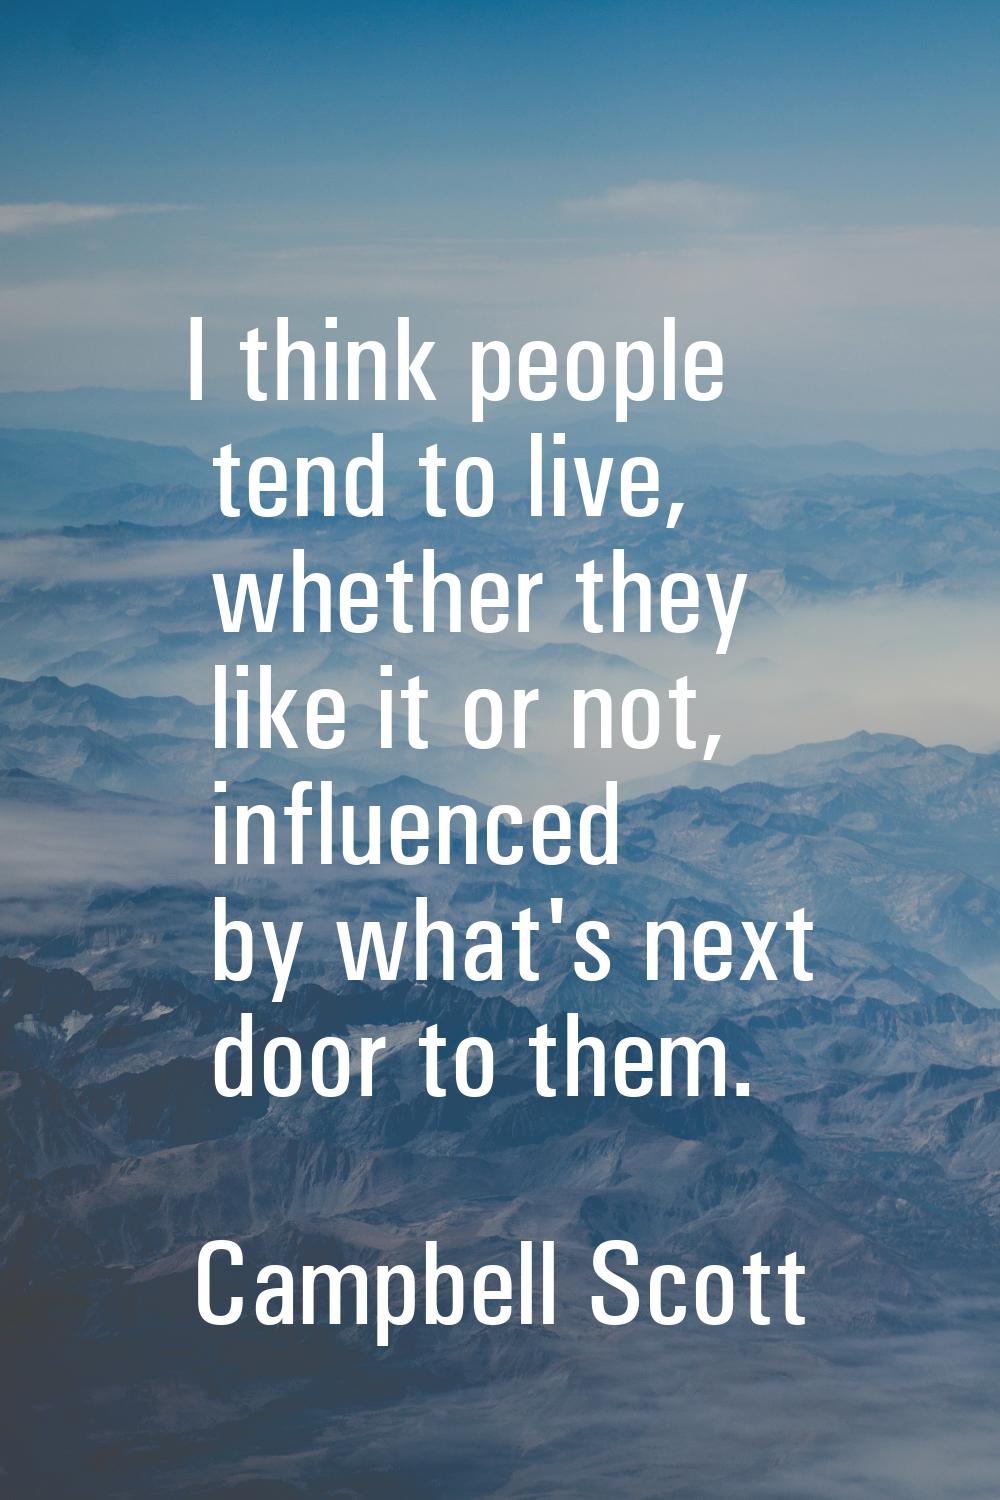 I think people tend to live, whether they like it or not, influenced by what's next door to them.